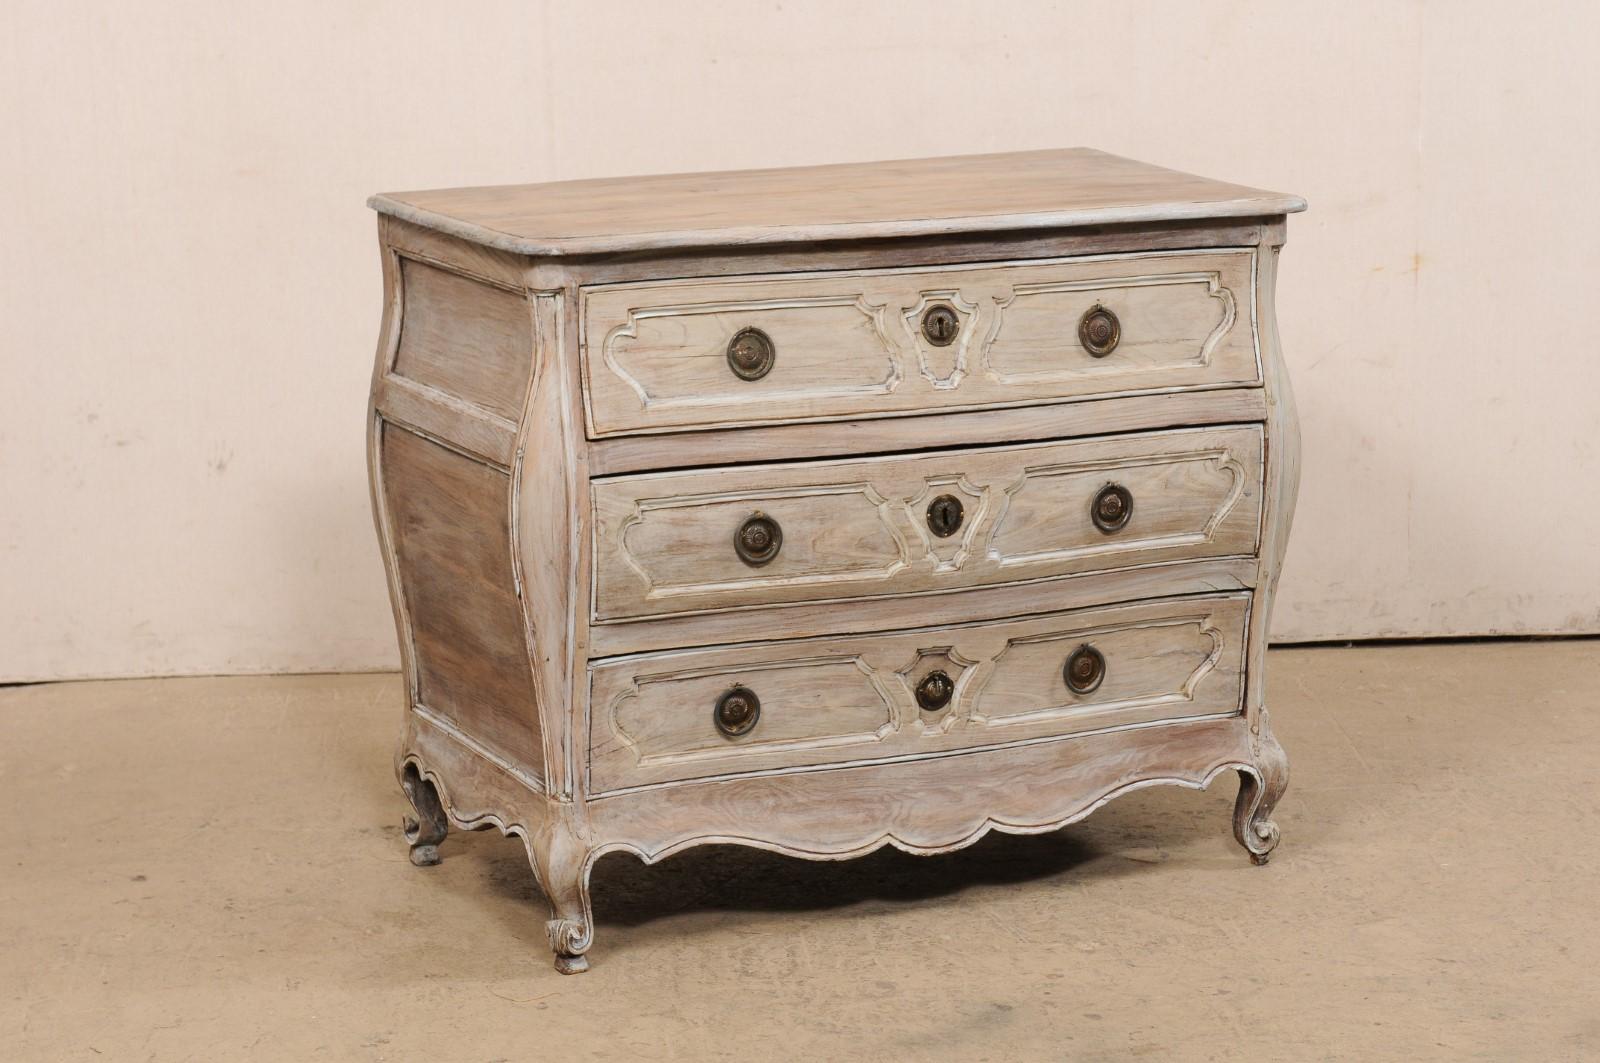 A French three-drawer carved and painted wood bombé chest from the turn of the 18th and 19th century. This antique commode from France has a shapely bombé designed body, with a fluidly, curvaceous form. The case houses three full-sized drawers, each